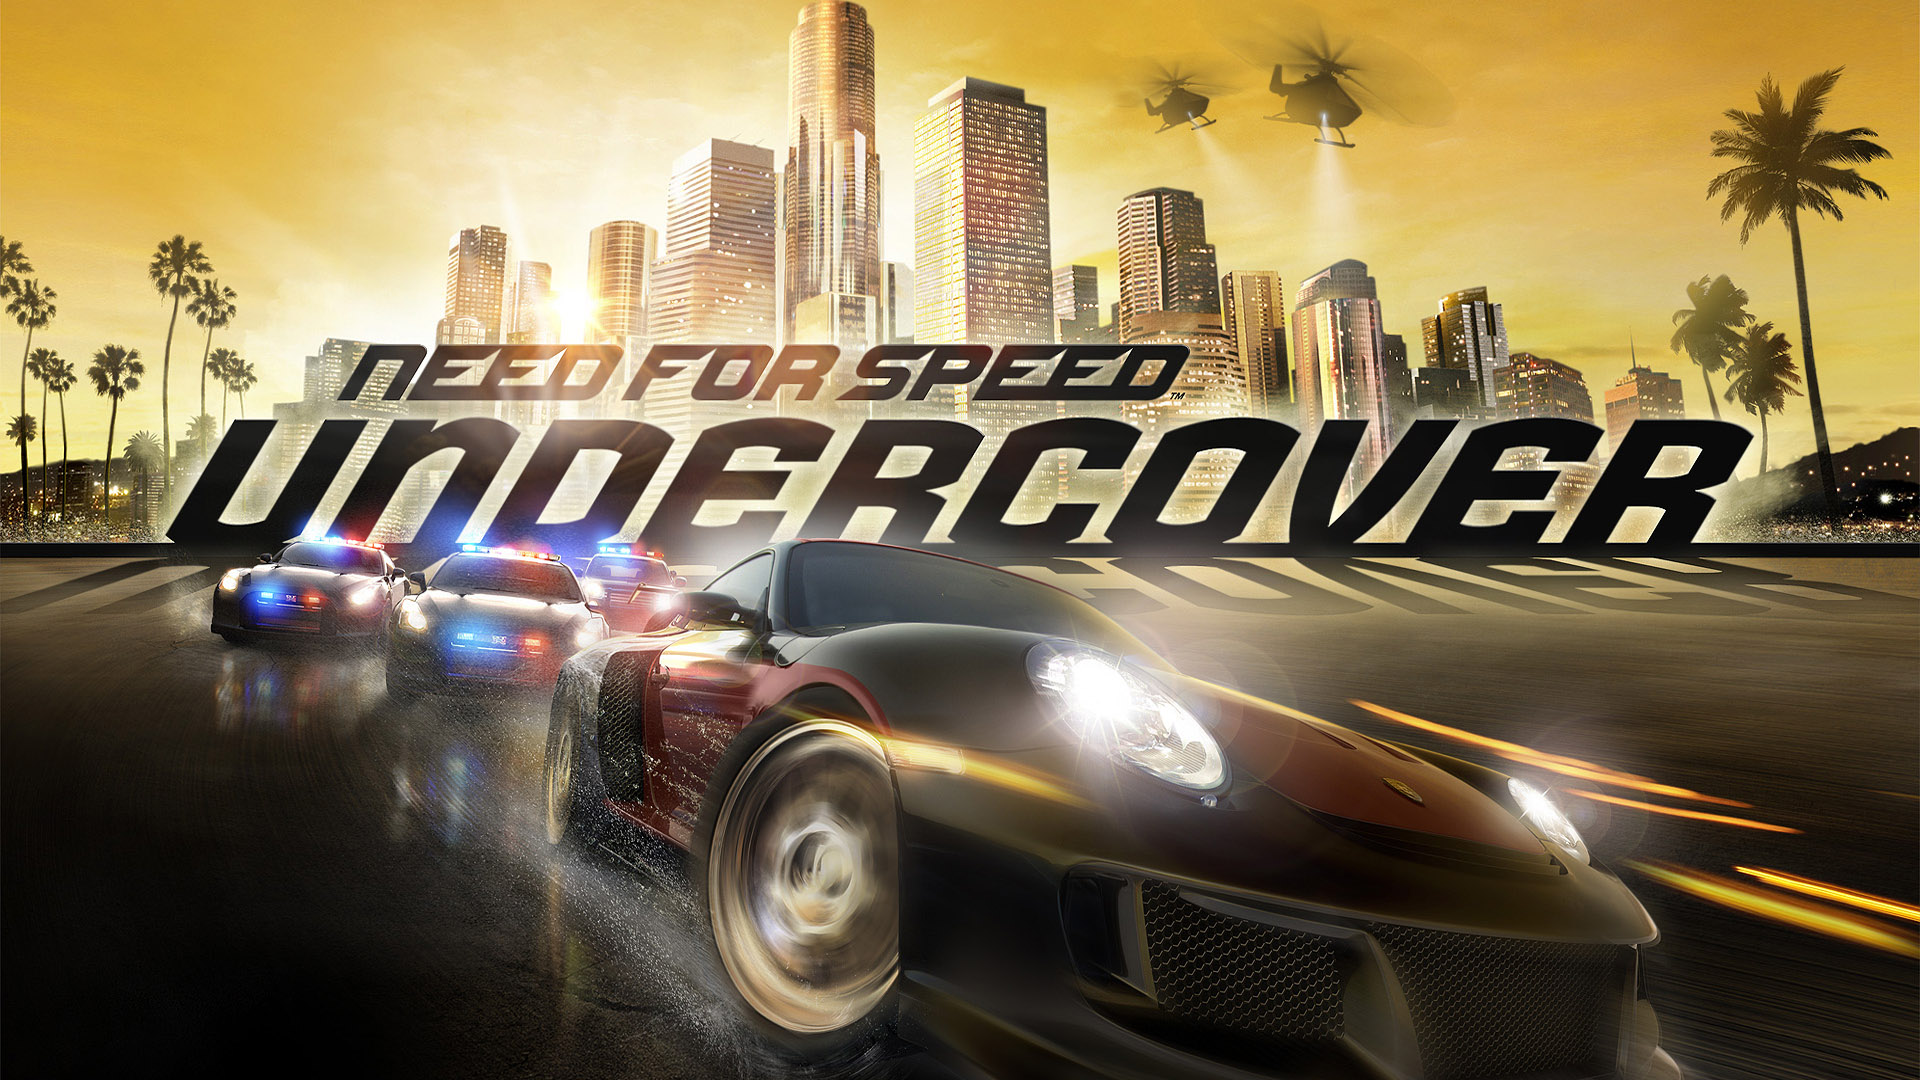 need for speed wallpaper background, wallpapers